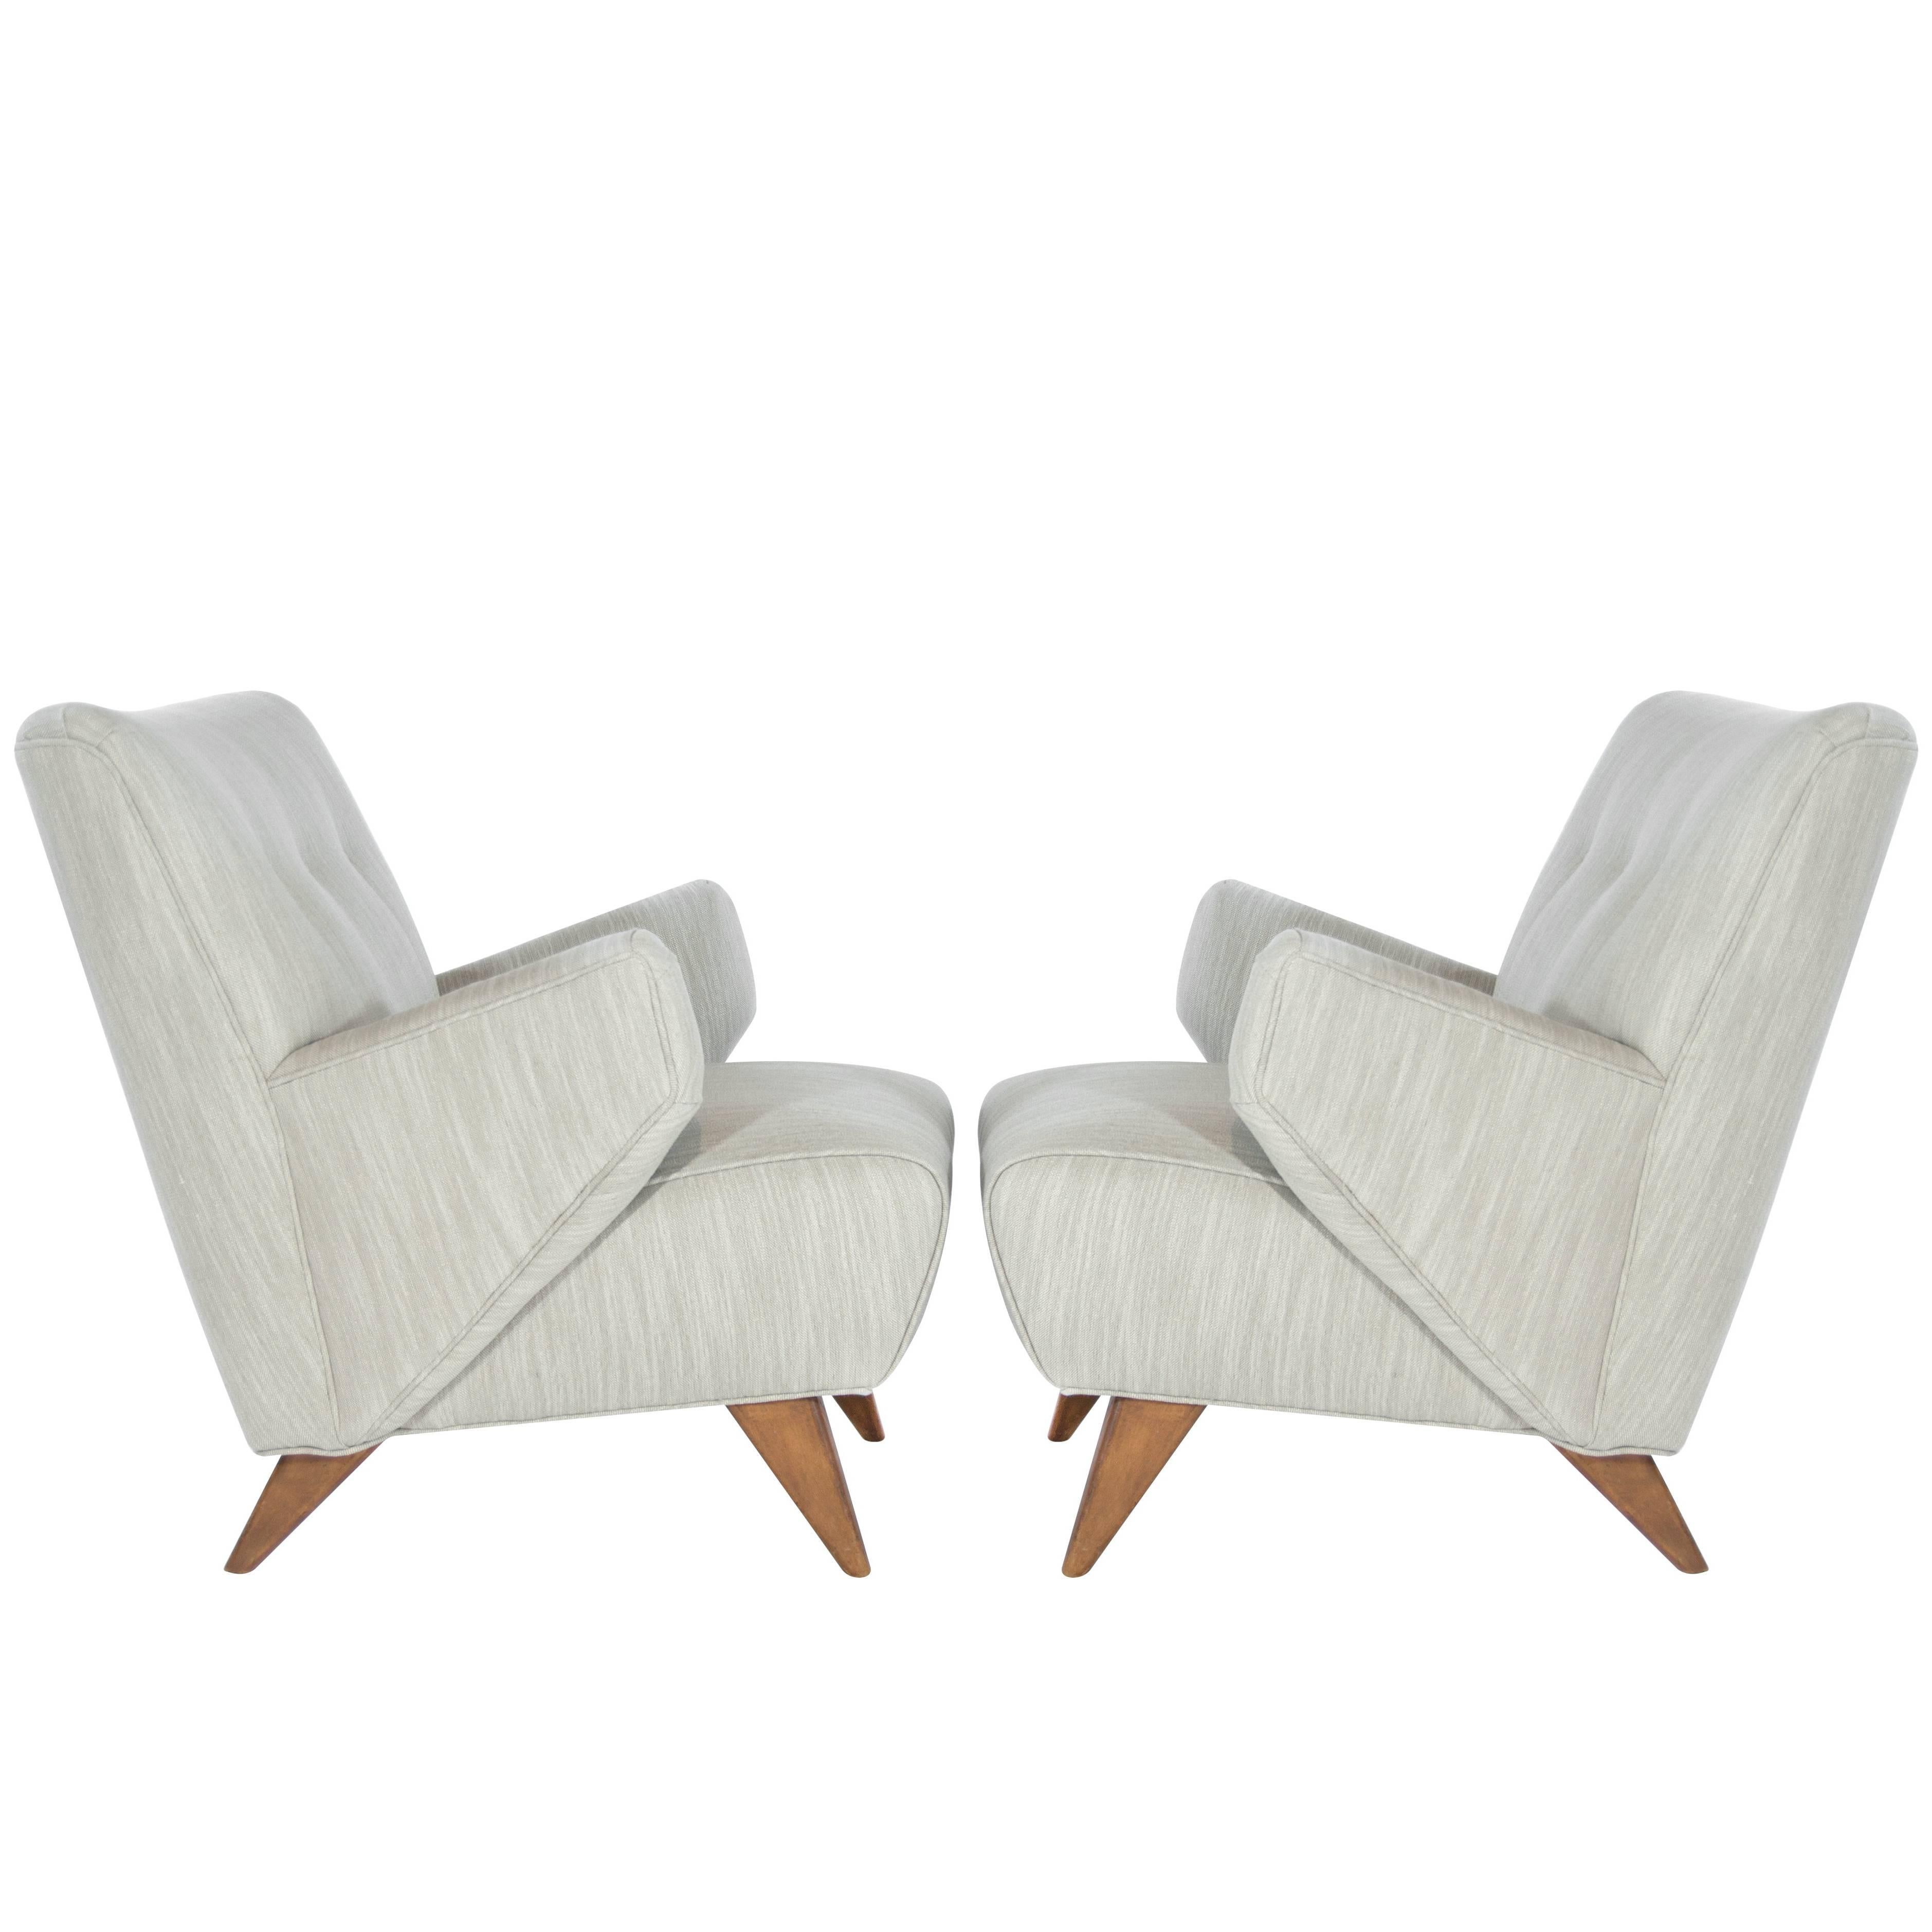 Jens Risom for Knoll Associates Lounge Chairs